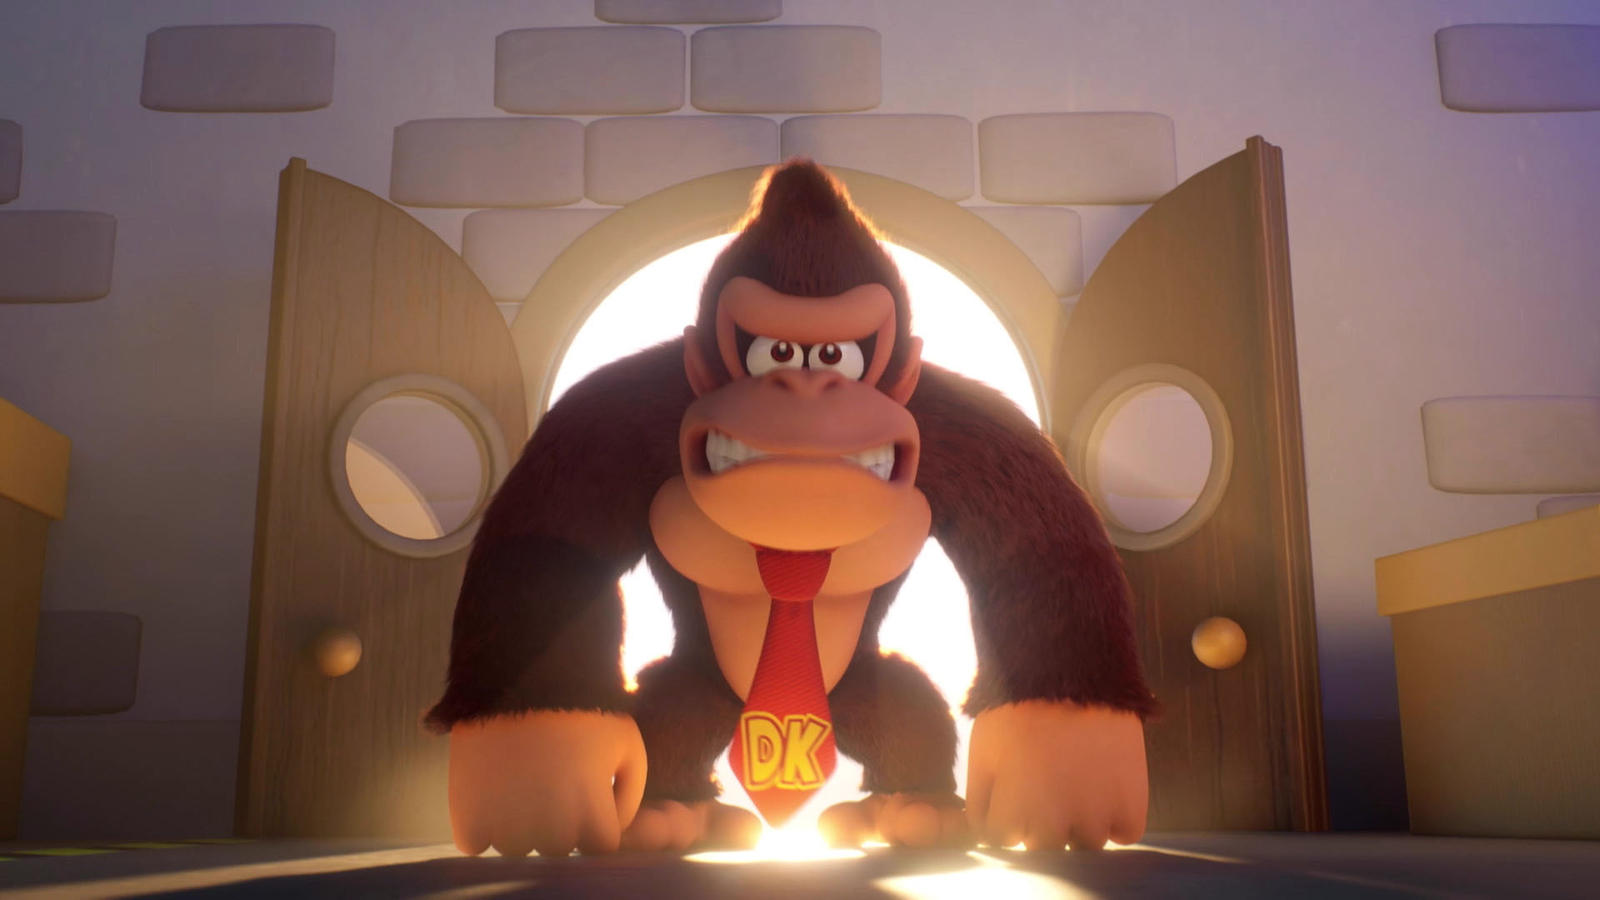 Where To Pre-Order Mario vs. Donkey Kong On Switch